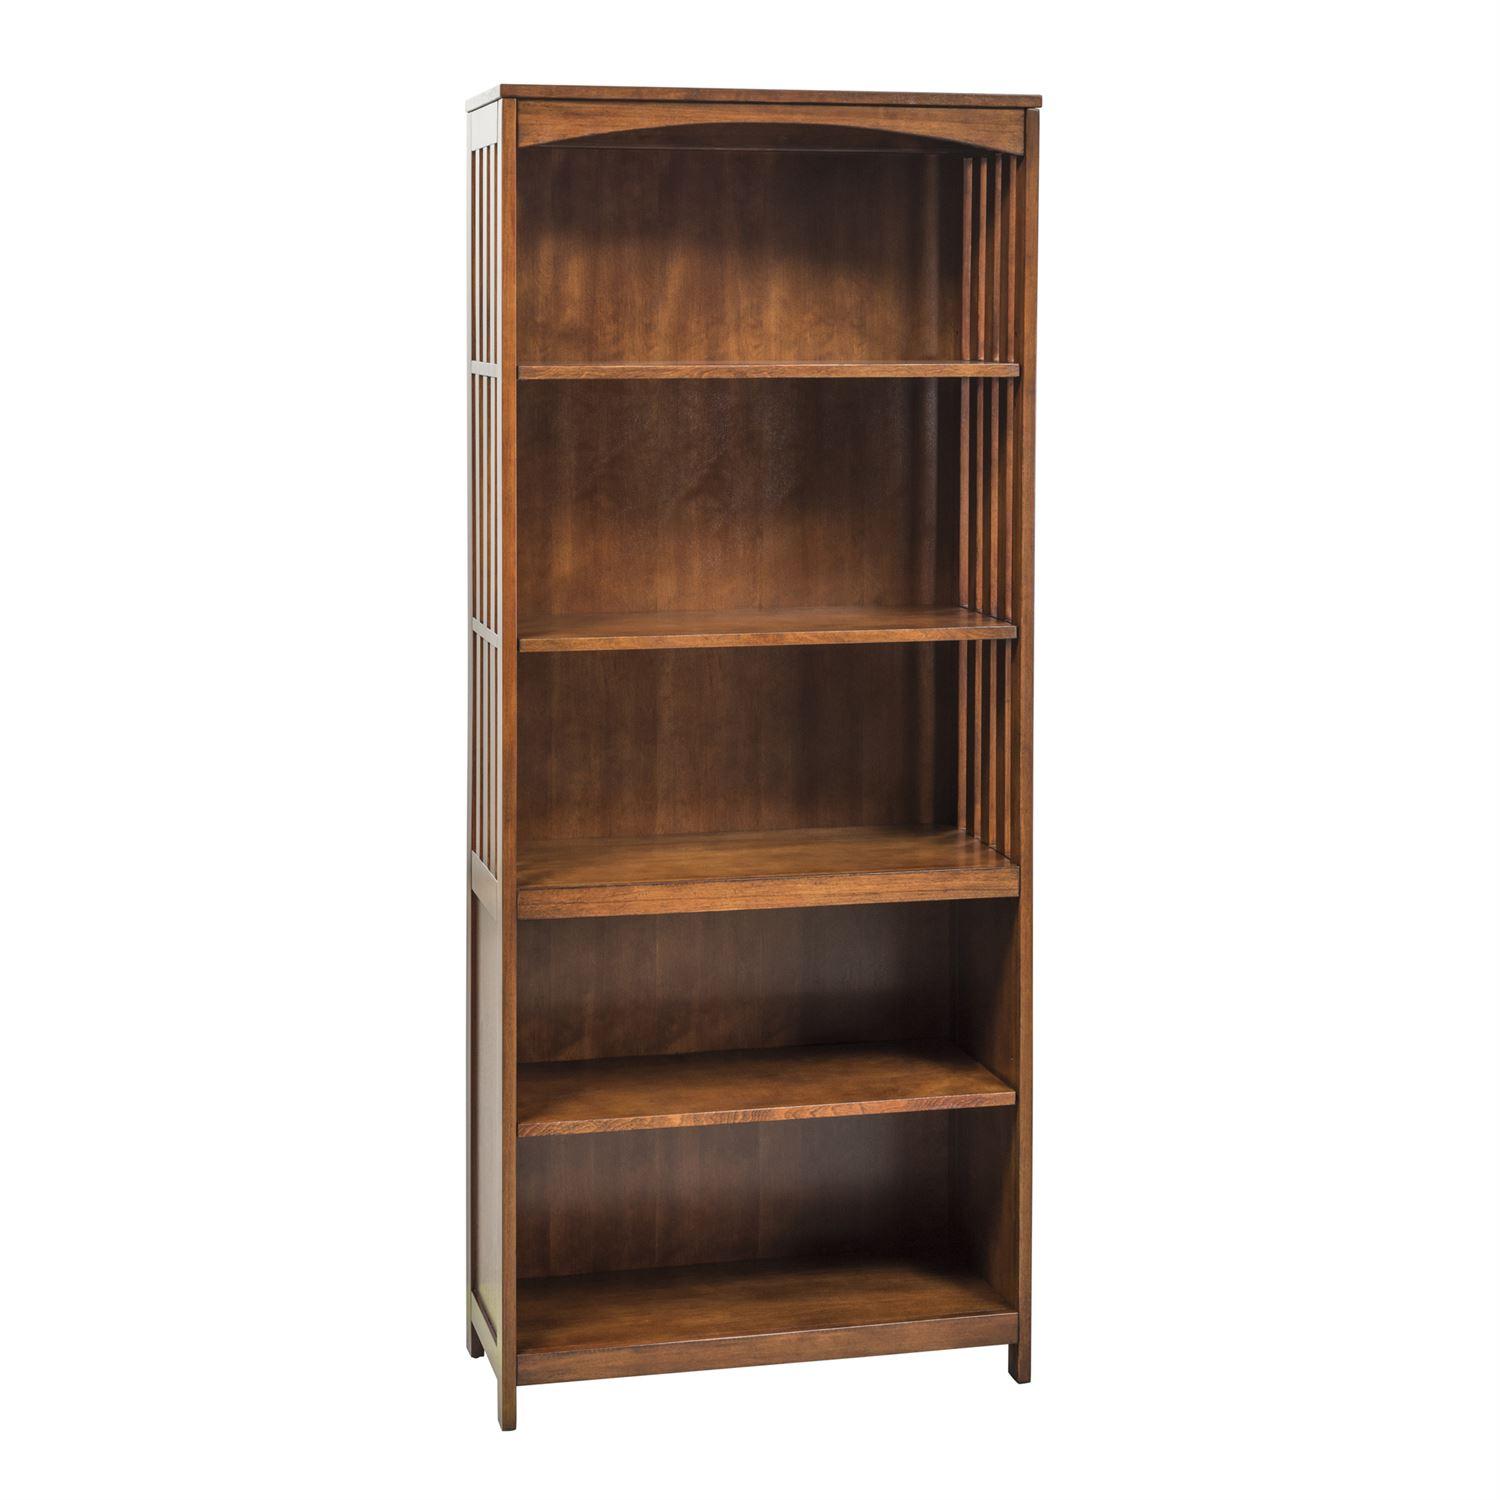 Transitional Bookcase Hampton Bay  (718-HO) Bookcase 718-HO201 in Brown 